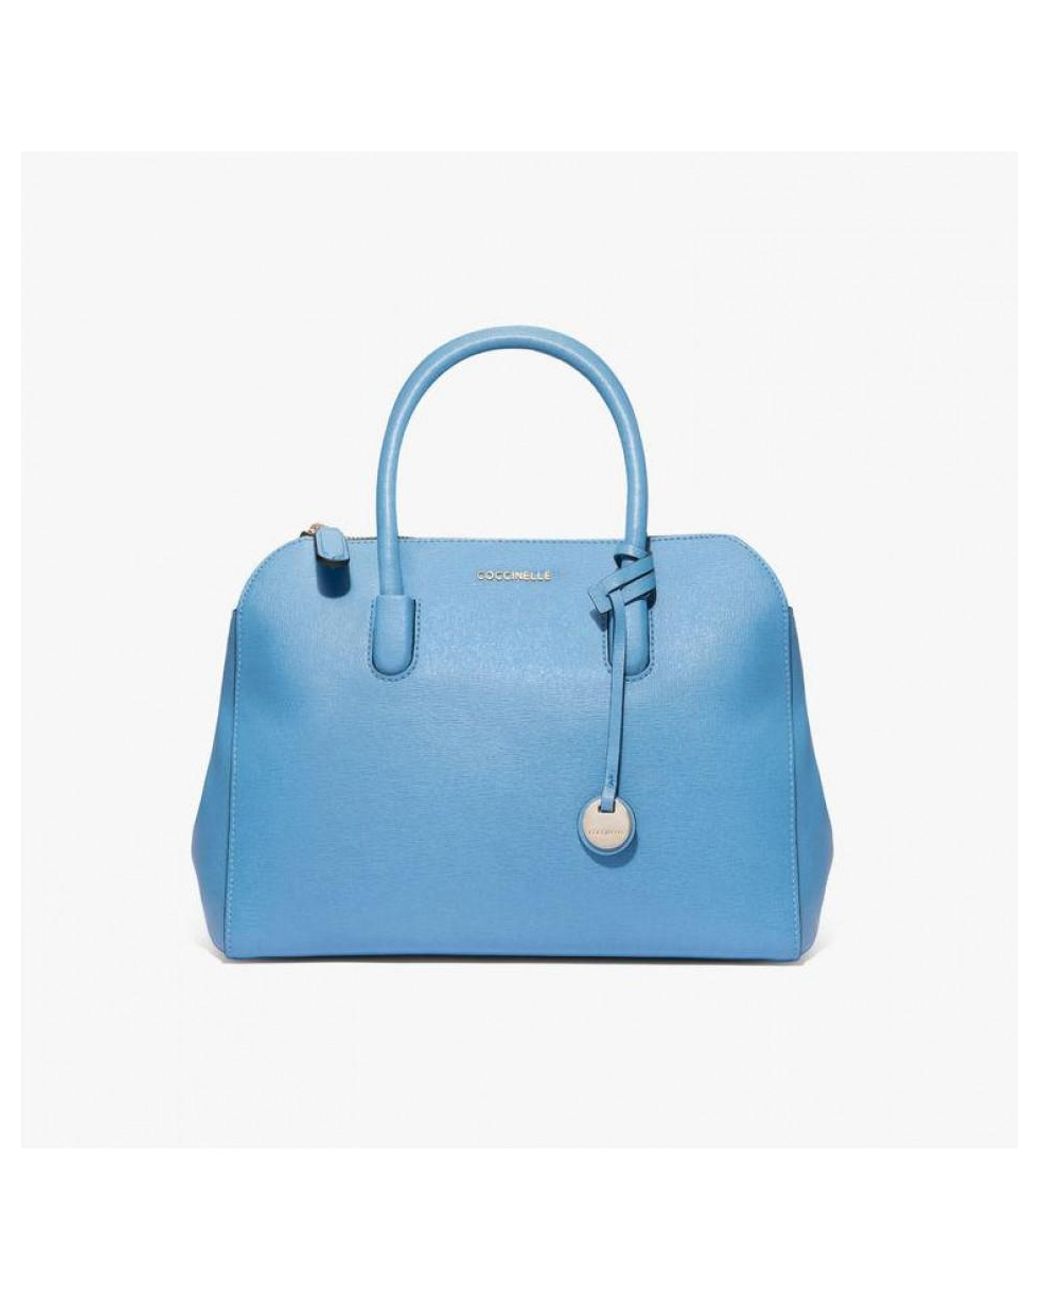 Coccinelle Leather Clementine Soft Hand Bag in Blue | Lyst Canada